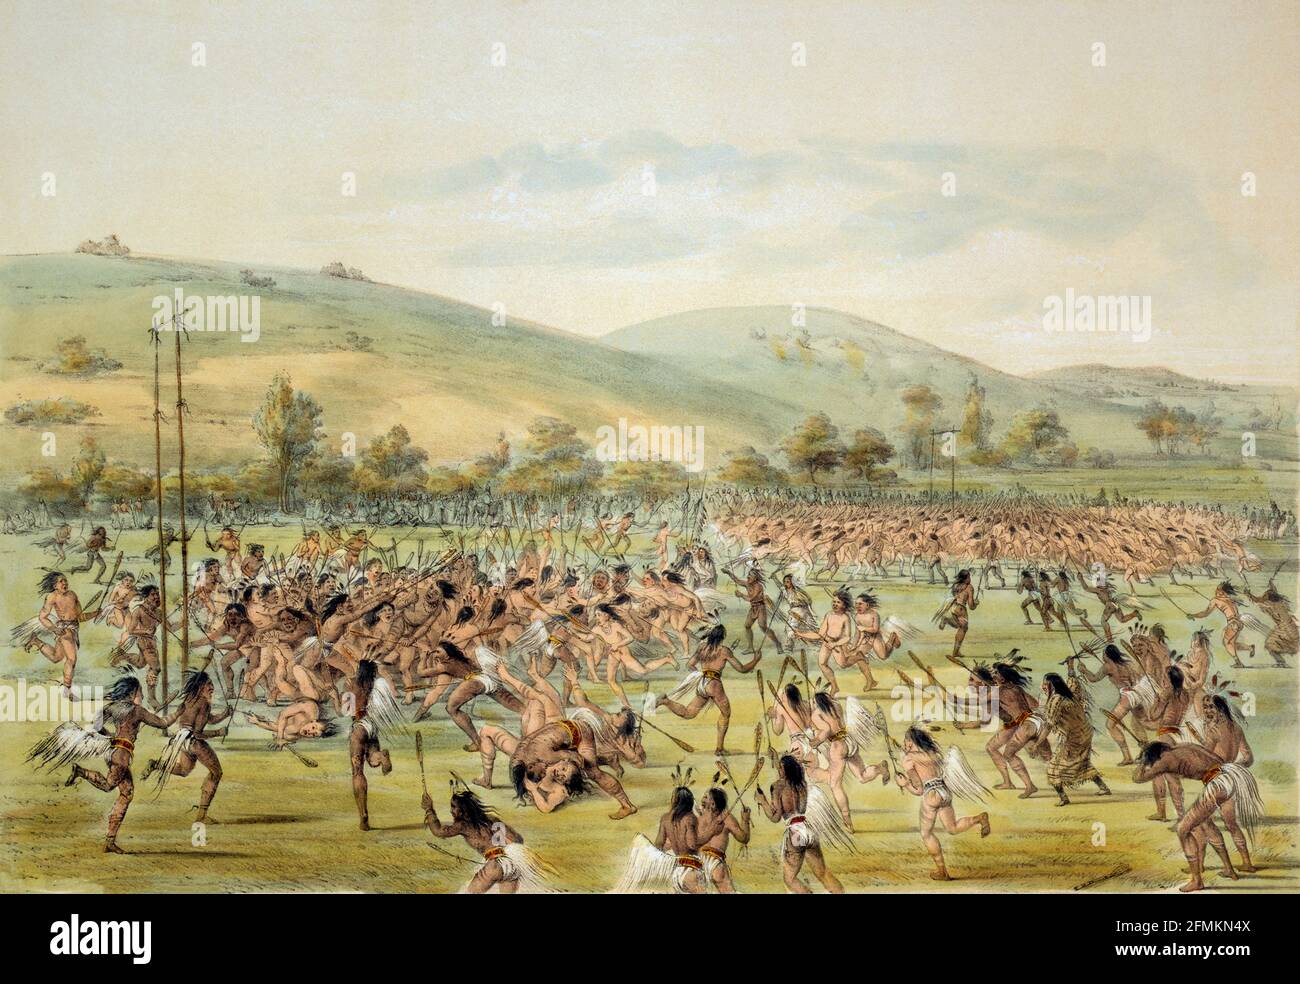 Native Americans playing a ball game similar to lacrosse, near Fort Gibson, Oklahoma.  After a work by American artist George Catlin, 1796 - 1872, who specialized in paintings of Native Americans. Stock Photo